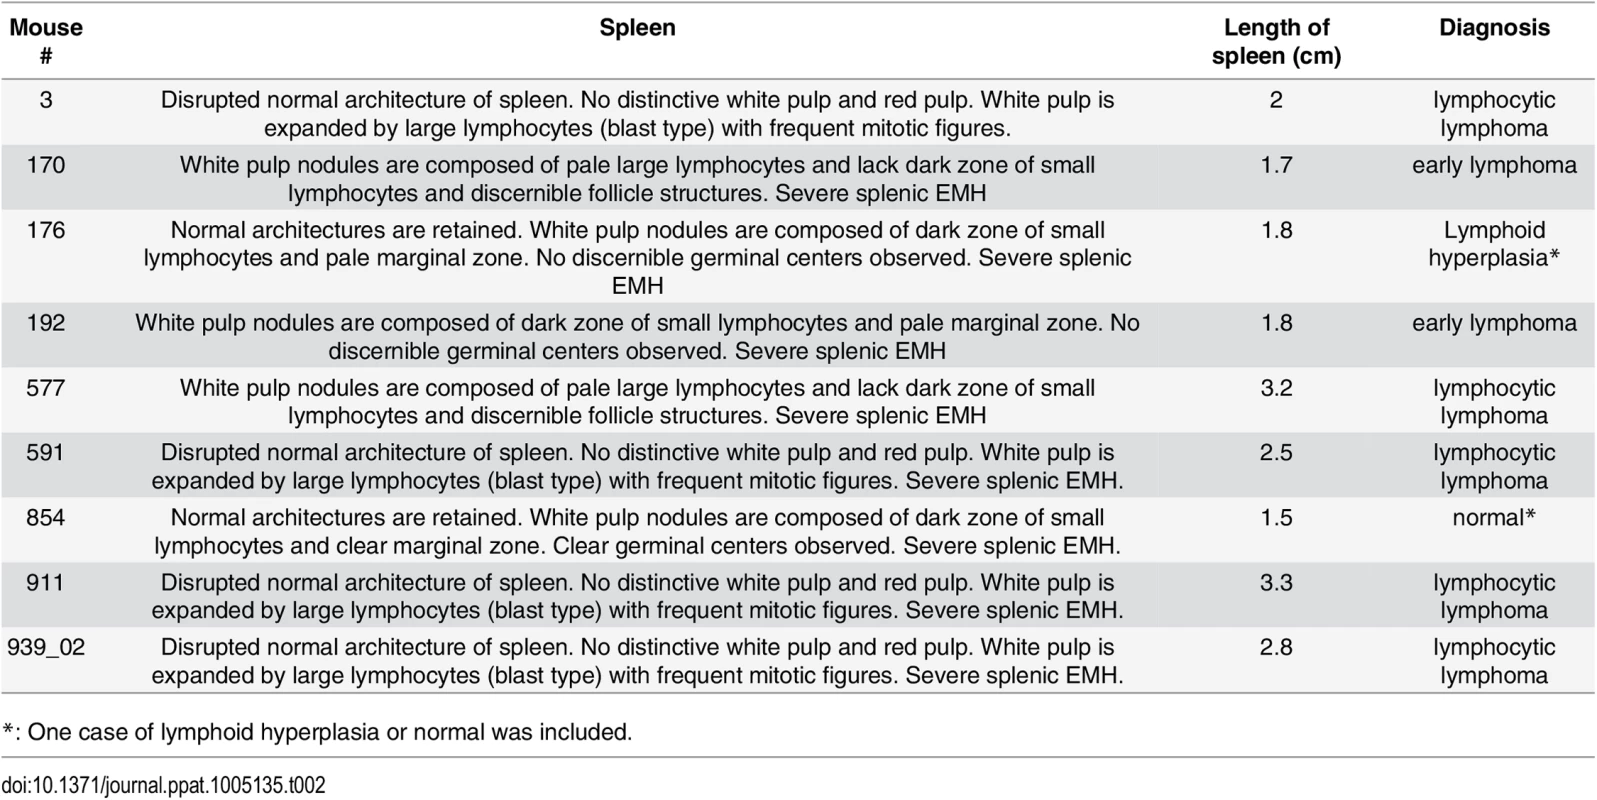 Pathology on spleen from Myc/latency mice diagnosed with lymphoma.